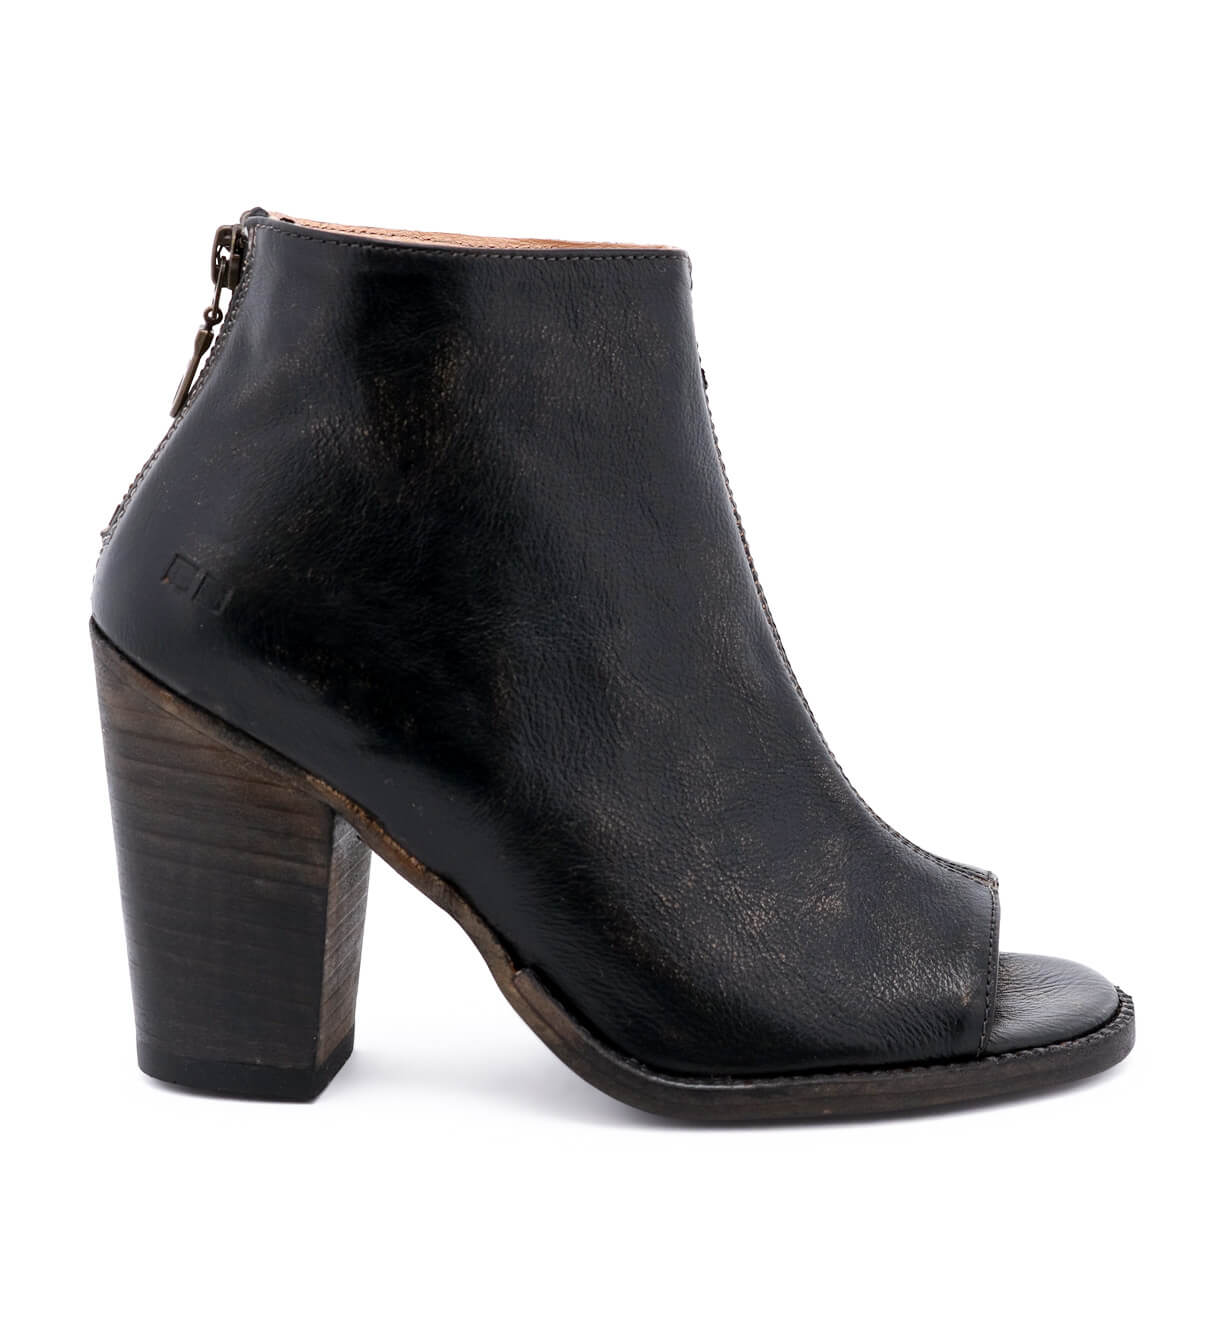 A black leather Onset ankle boot with a wooden heel by Bed Stu.